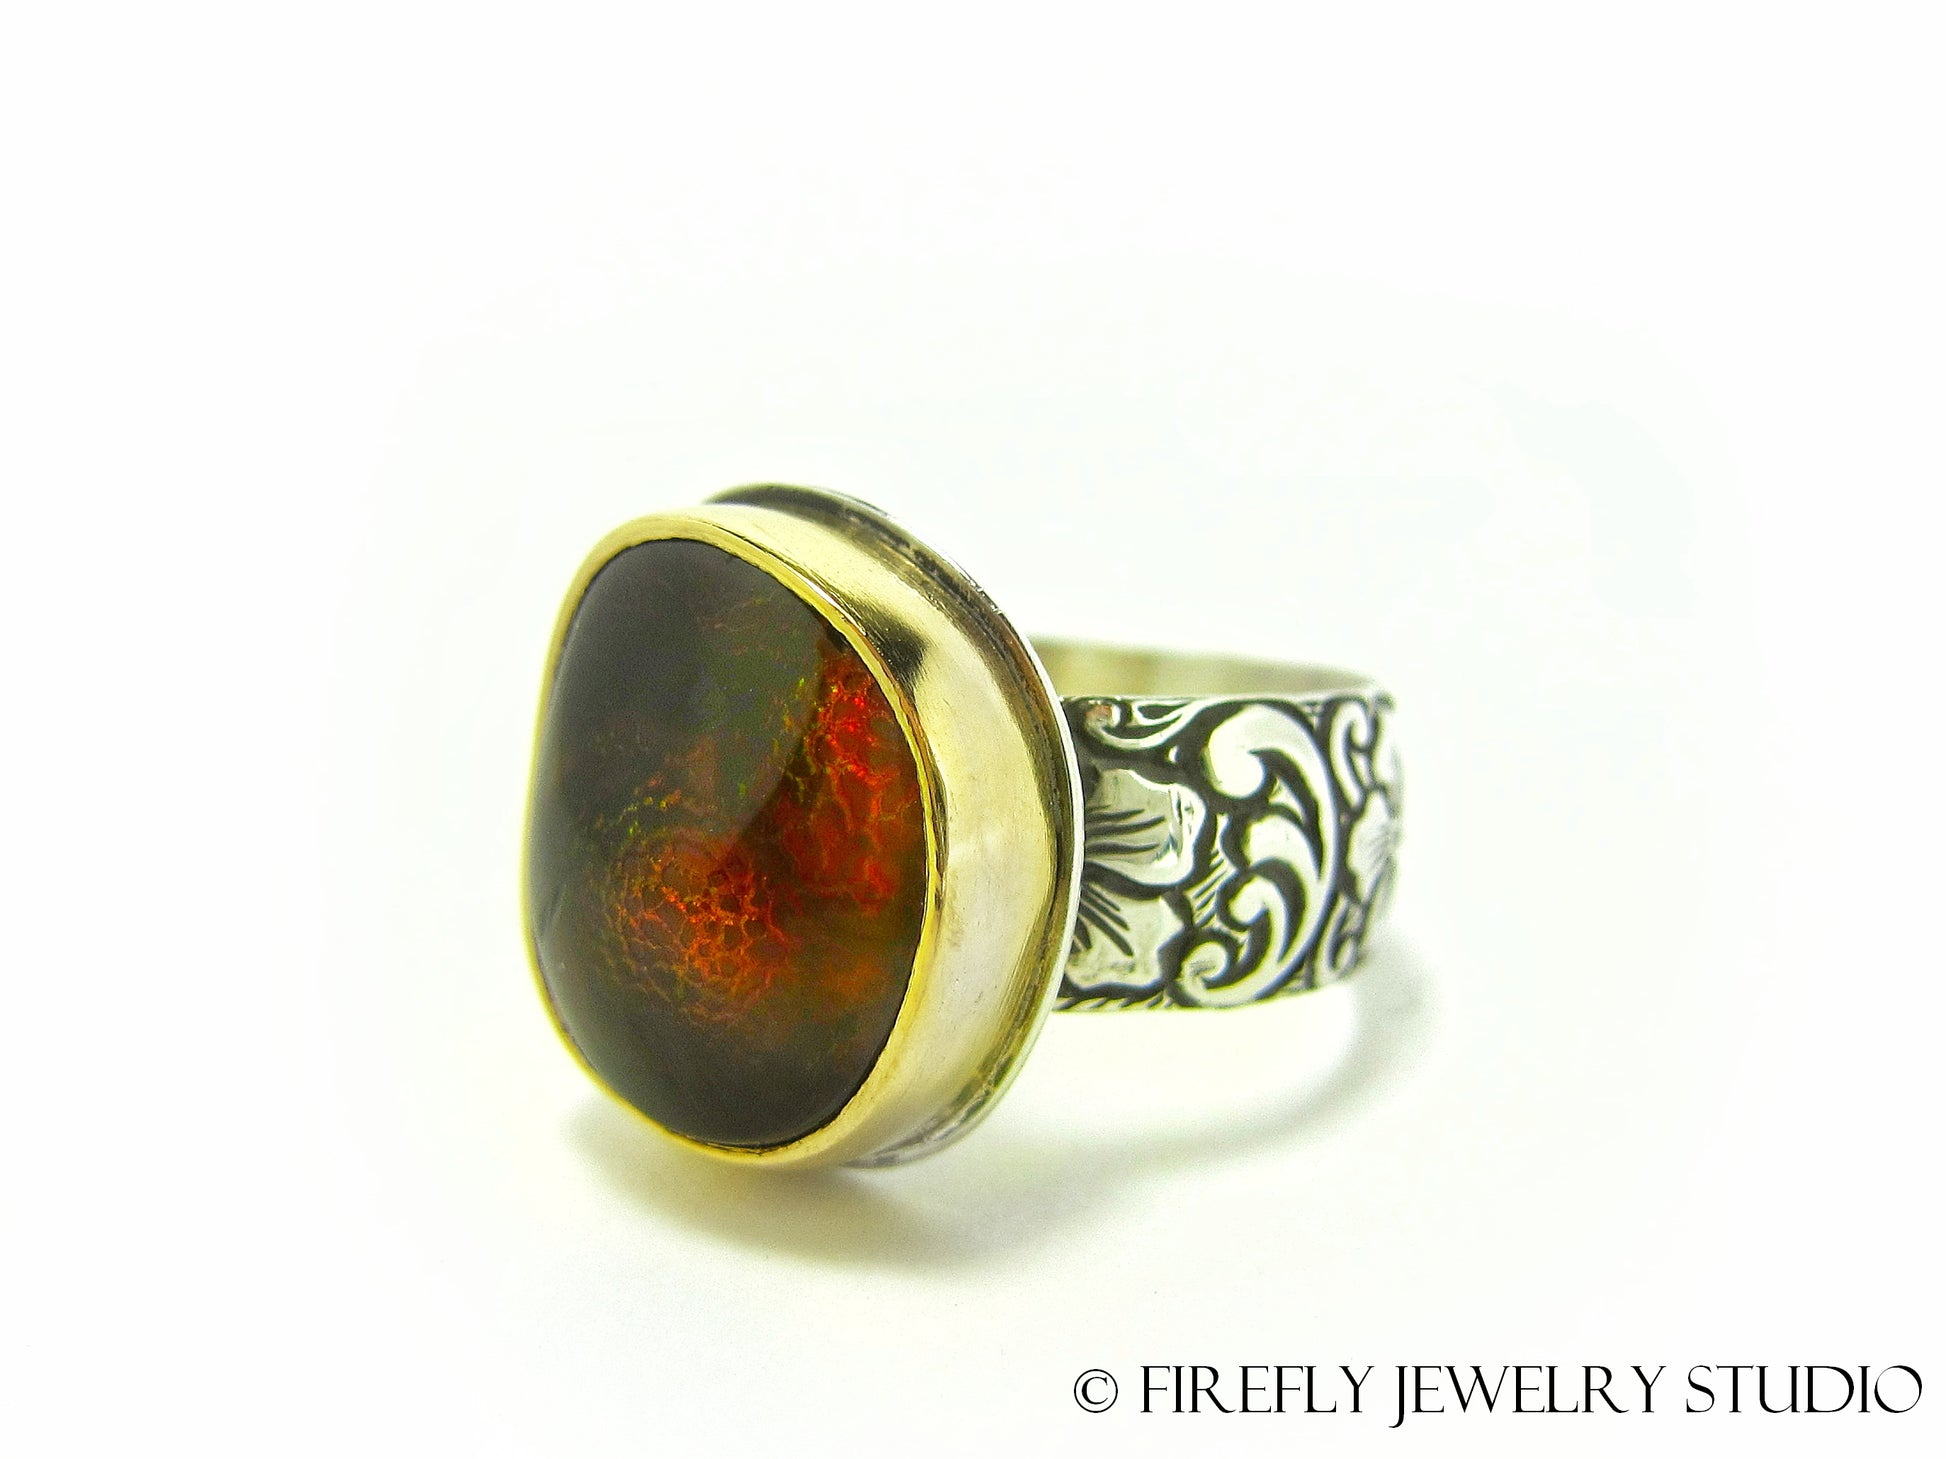 Fire Agate Dragon Skin Ring in 24k Gold and Sterling Silver. Size 6.25 - Firefly Jewelry Studio